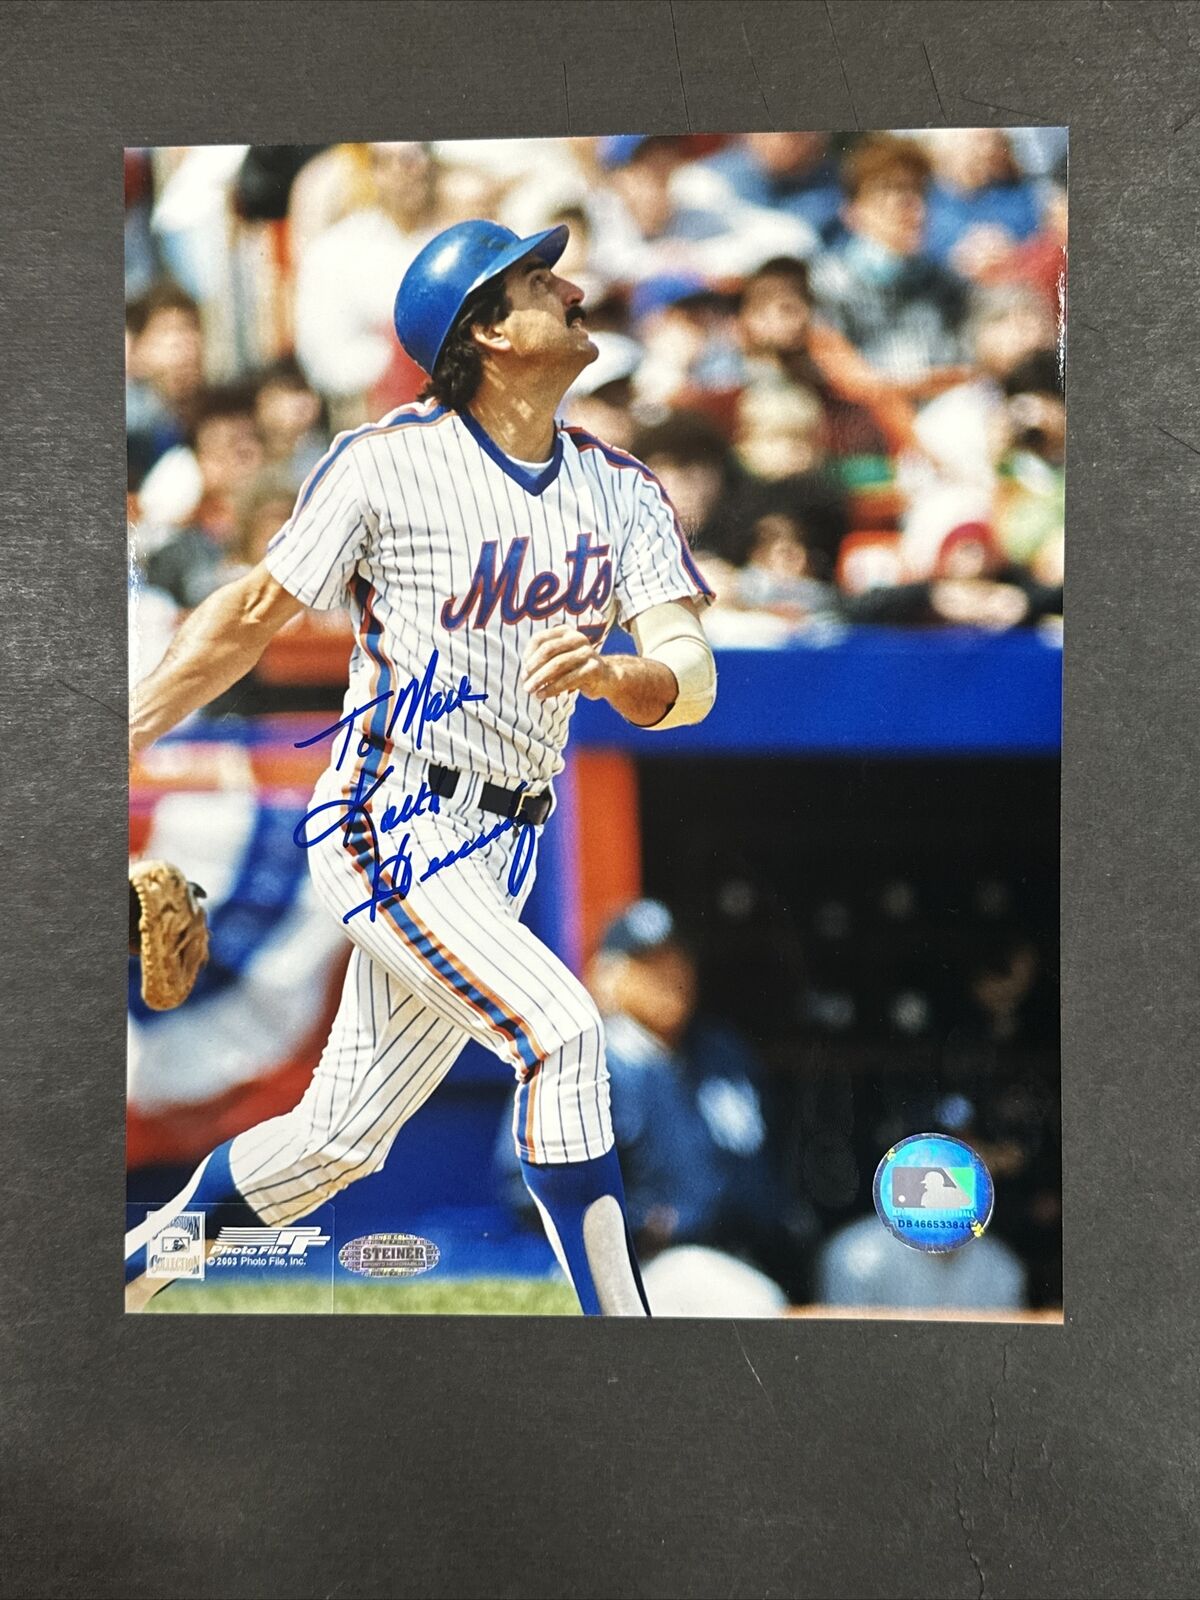 Keith Hernandez Signed 8x10 Photo 1986 New York Mets To Mark